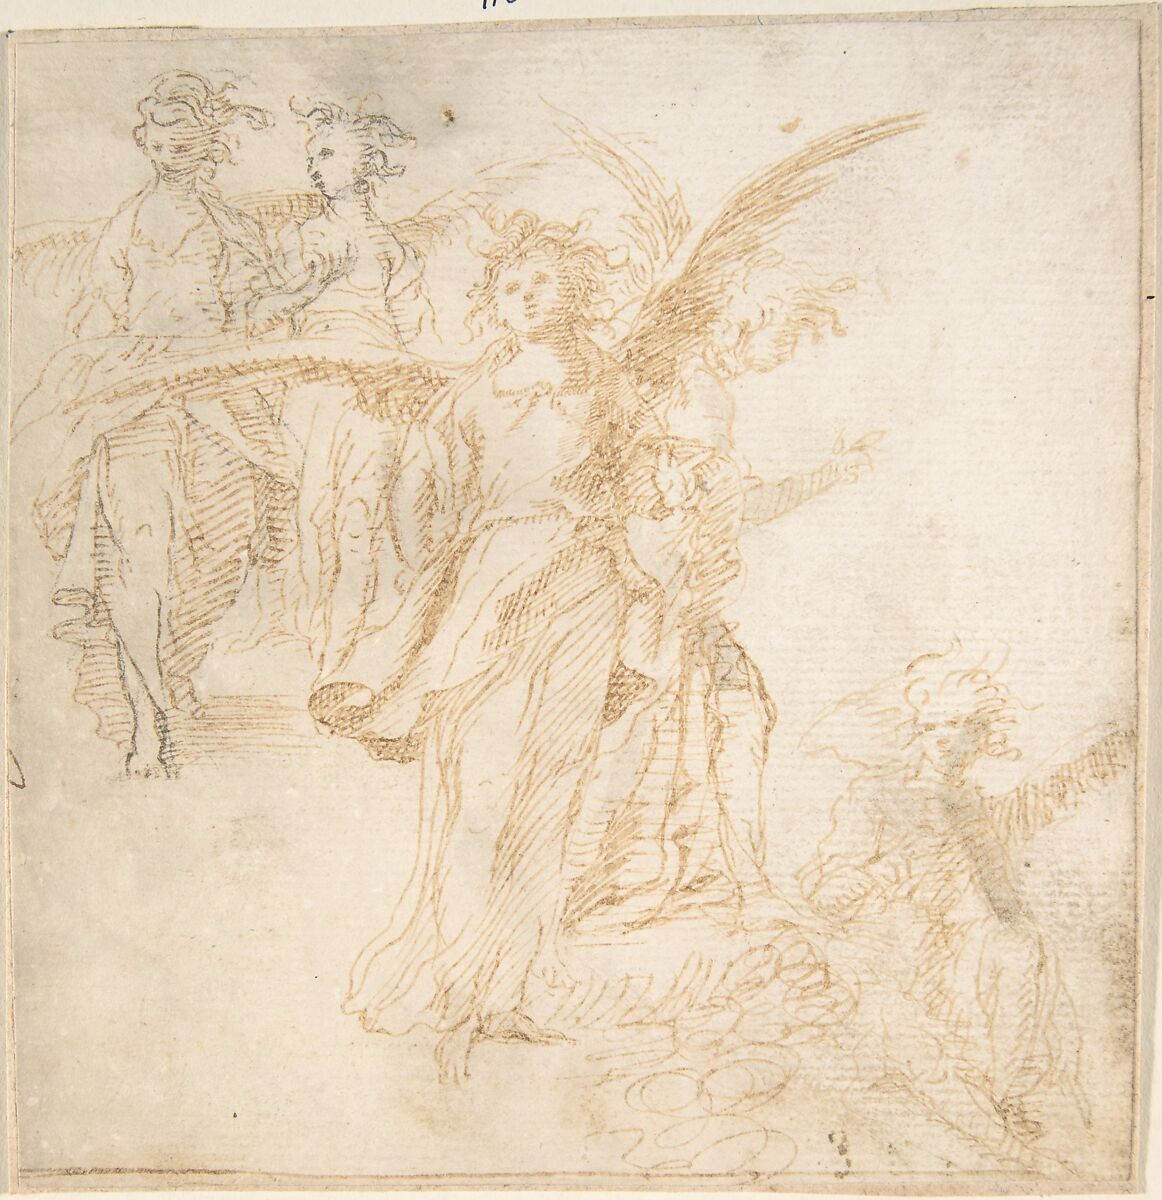 Studies for Figures of Five Angels, Anonymous, Spanish, School of Seville, 17th century, Pen and light brown ink over black chalk underdrawing. Traces of brush and gray wash. On off-white paper 